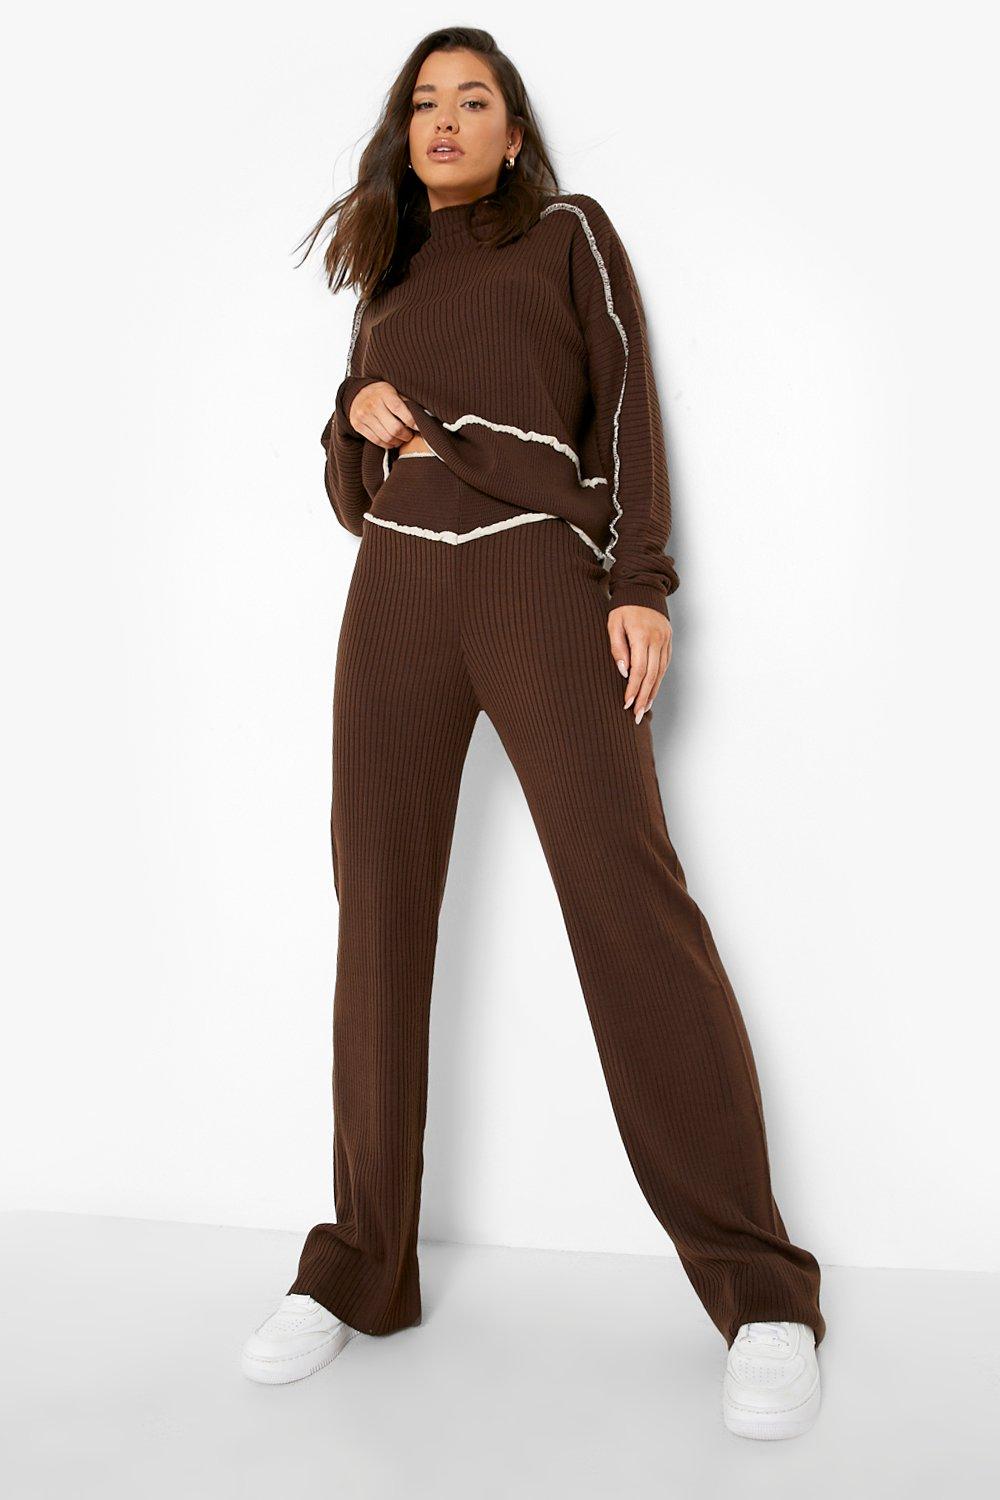 Chocolate Brown Sweatpants, Two Piece Sets